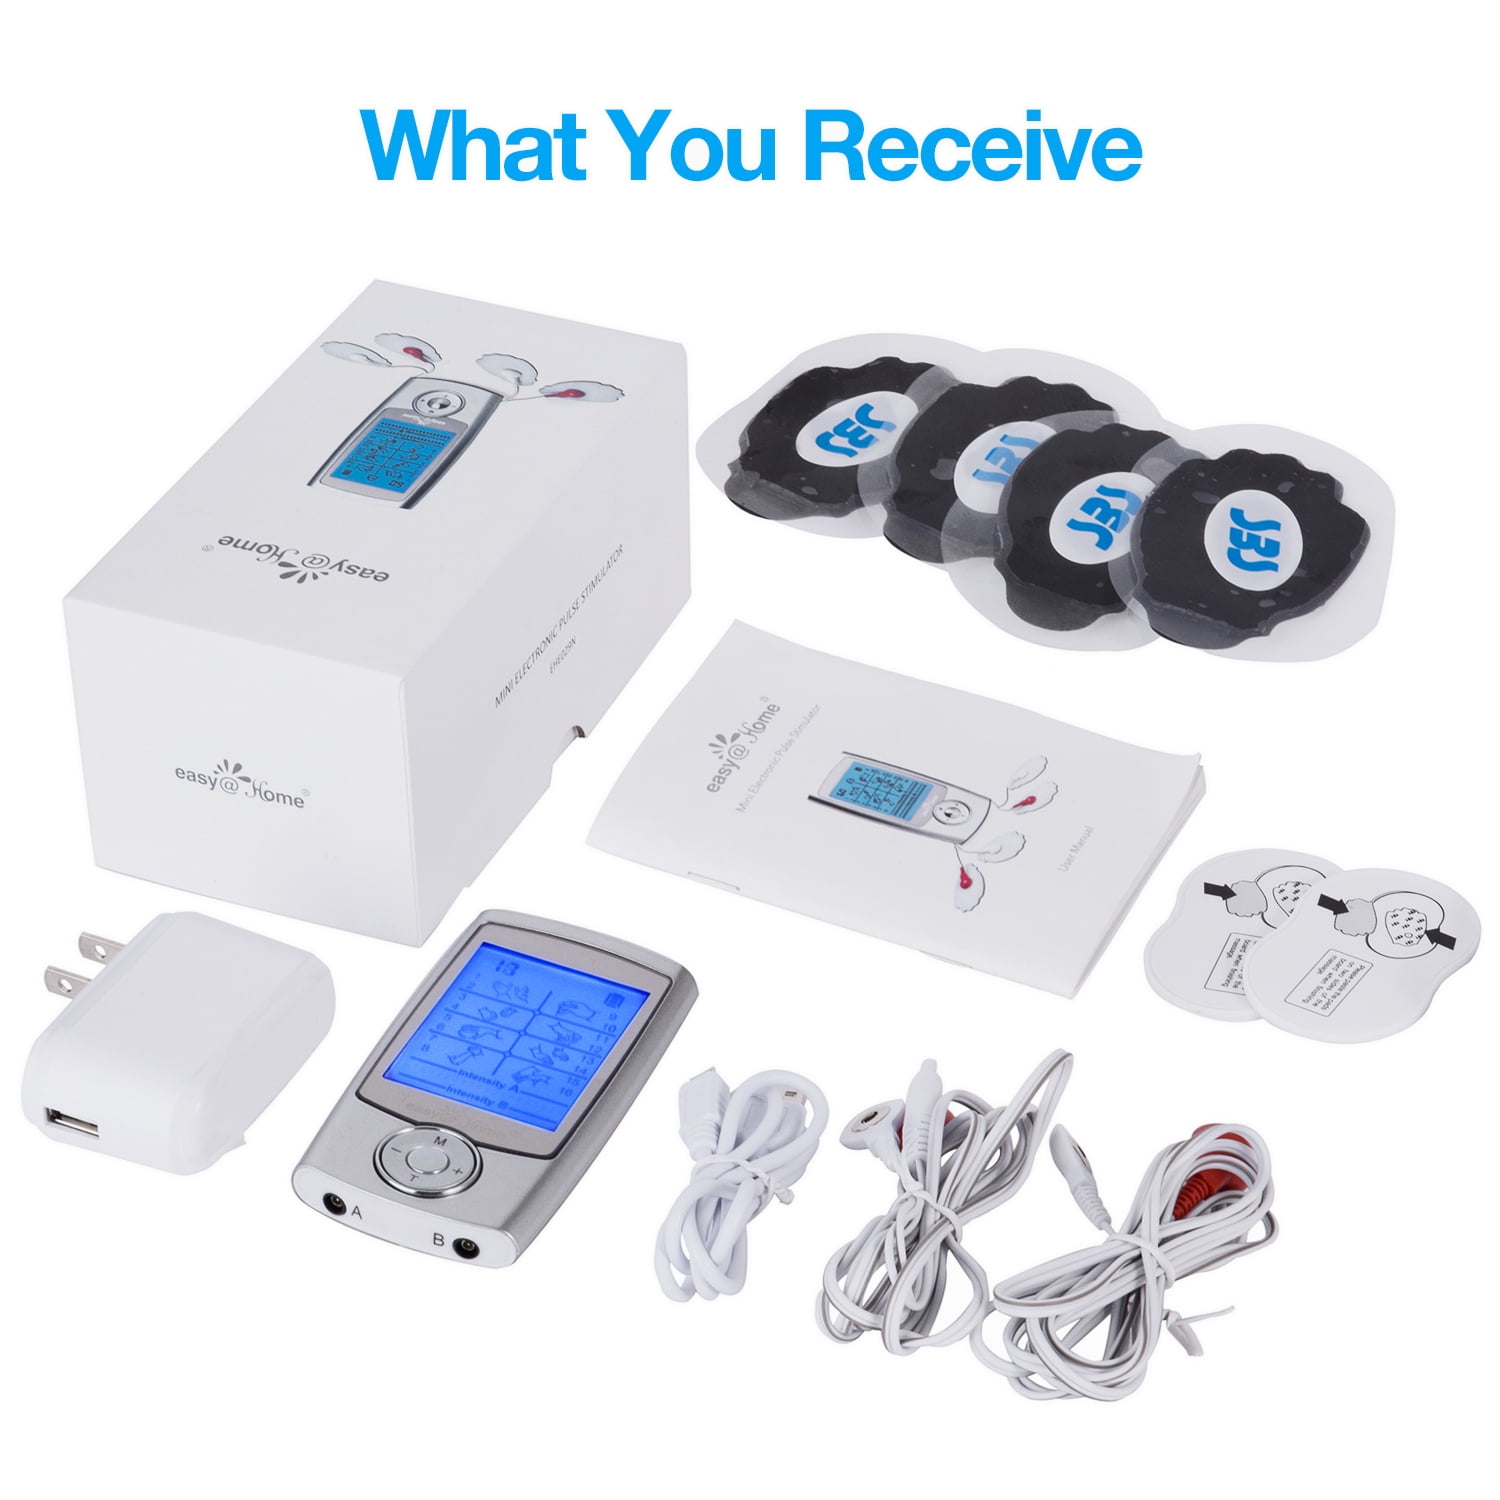 Easy@Home TENS Unit + EMS for Pain Relief & Muscle Massage, Wireless  Portable 850253007765